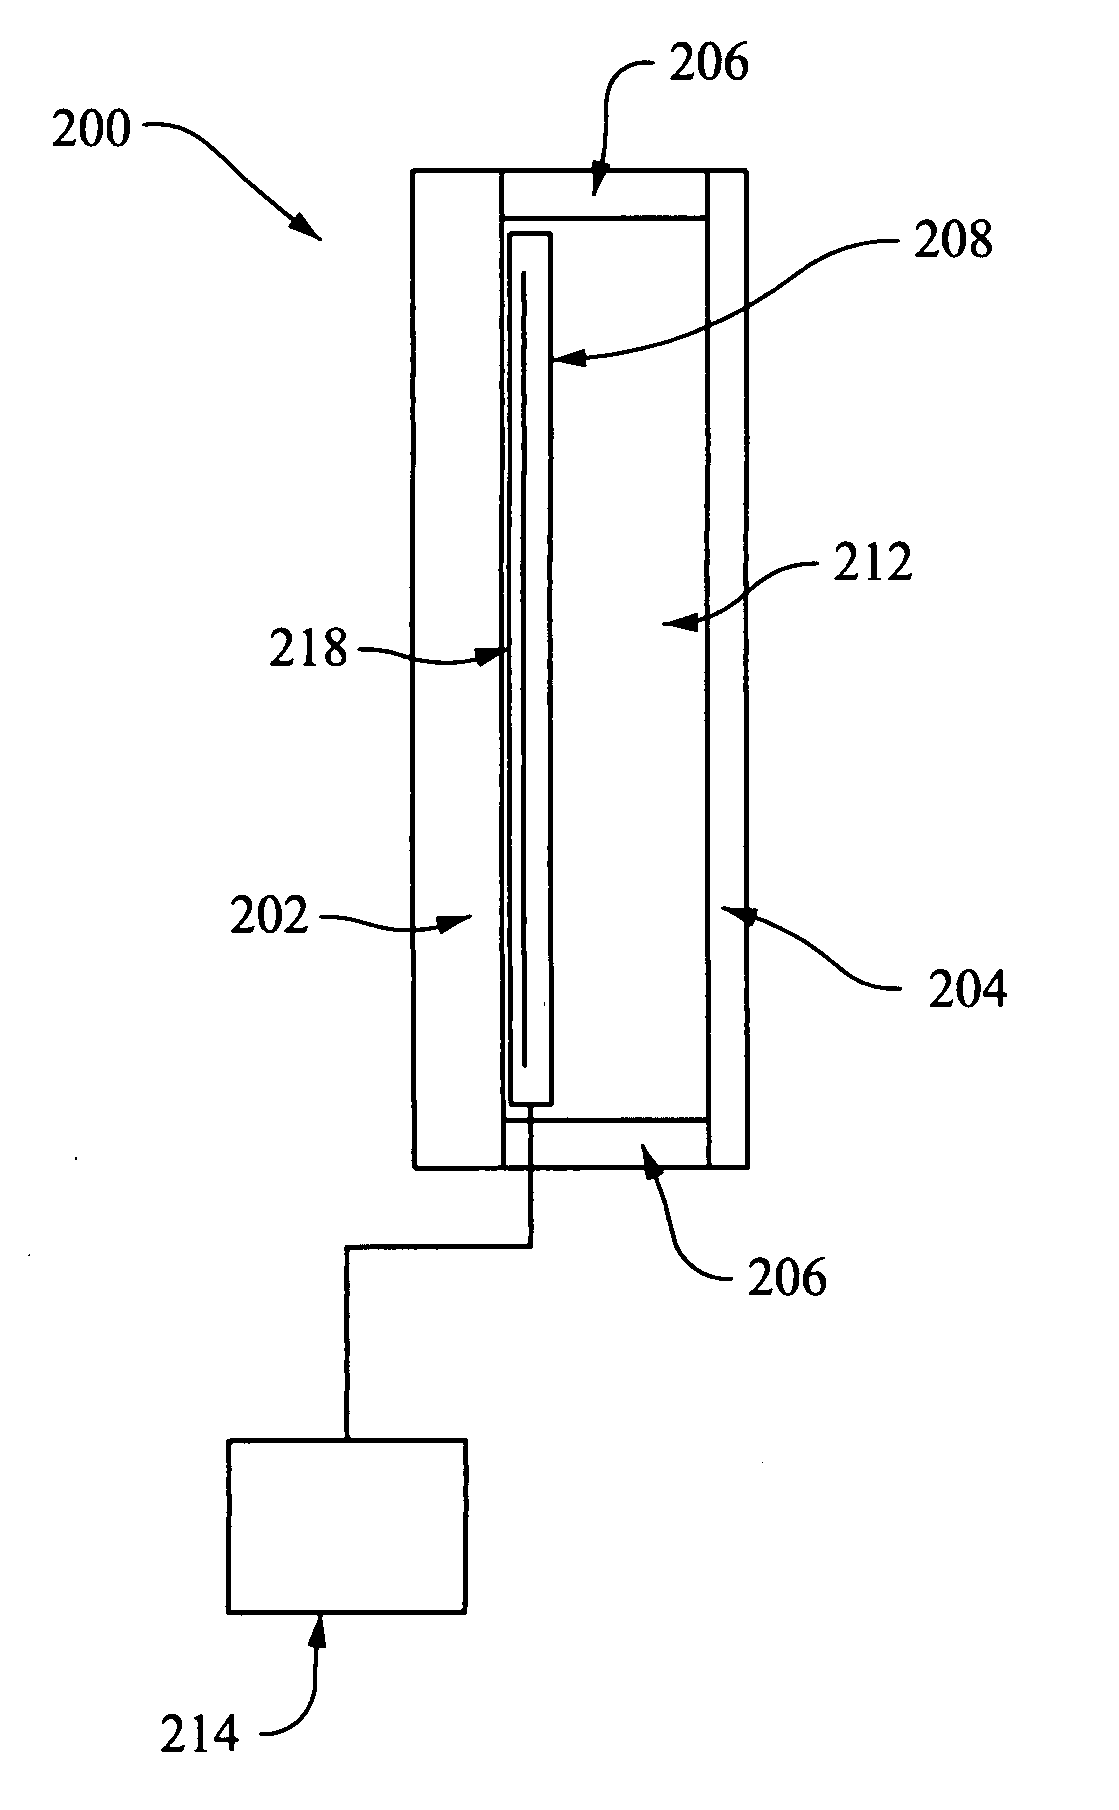 Insulated glass units incorporating emitters, and/or methods of making the same